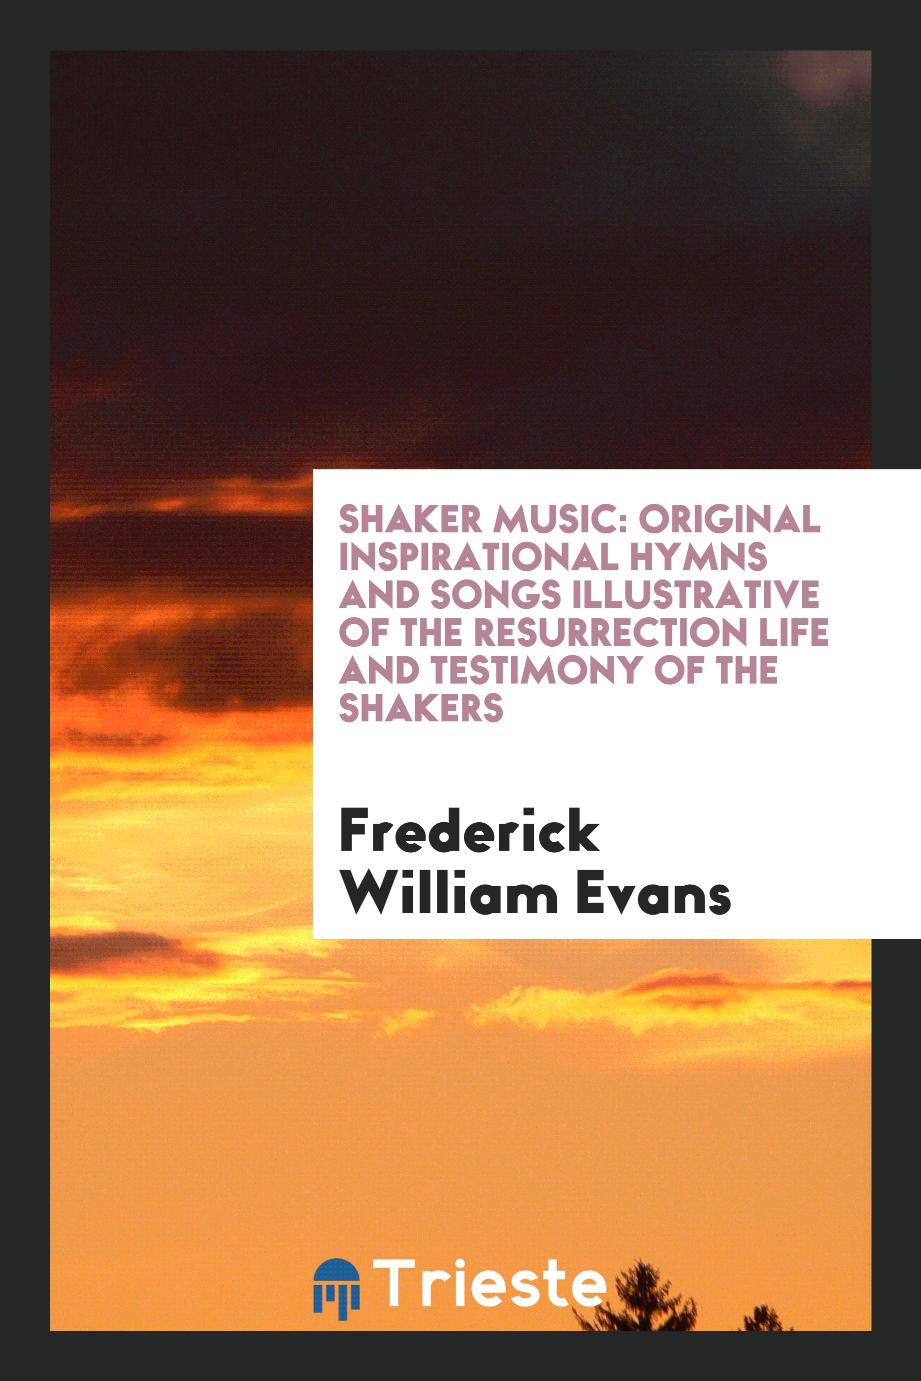 Shaker Music: Original Inspirational Hymns and Songs Illustrative of the Resurrection Life and Testimony of the Shakers